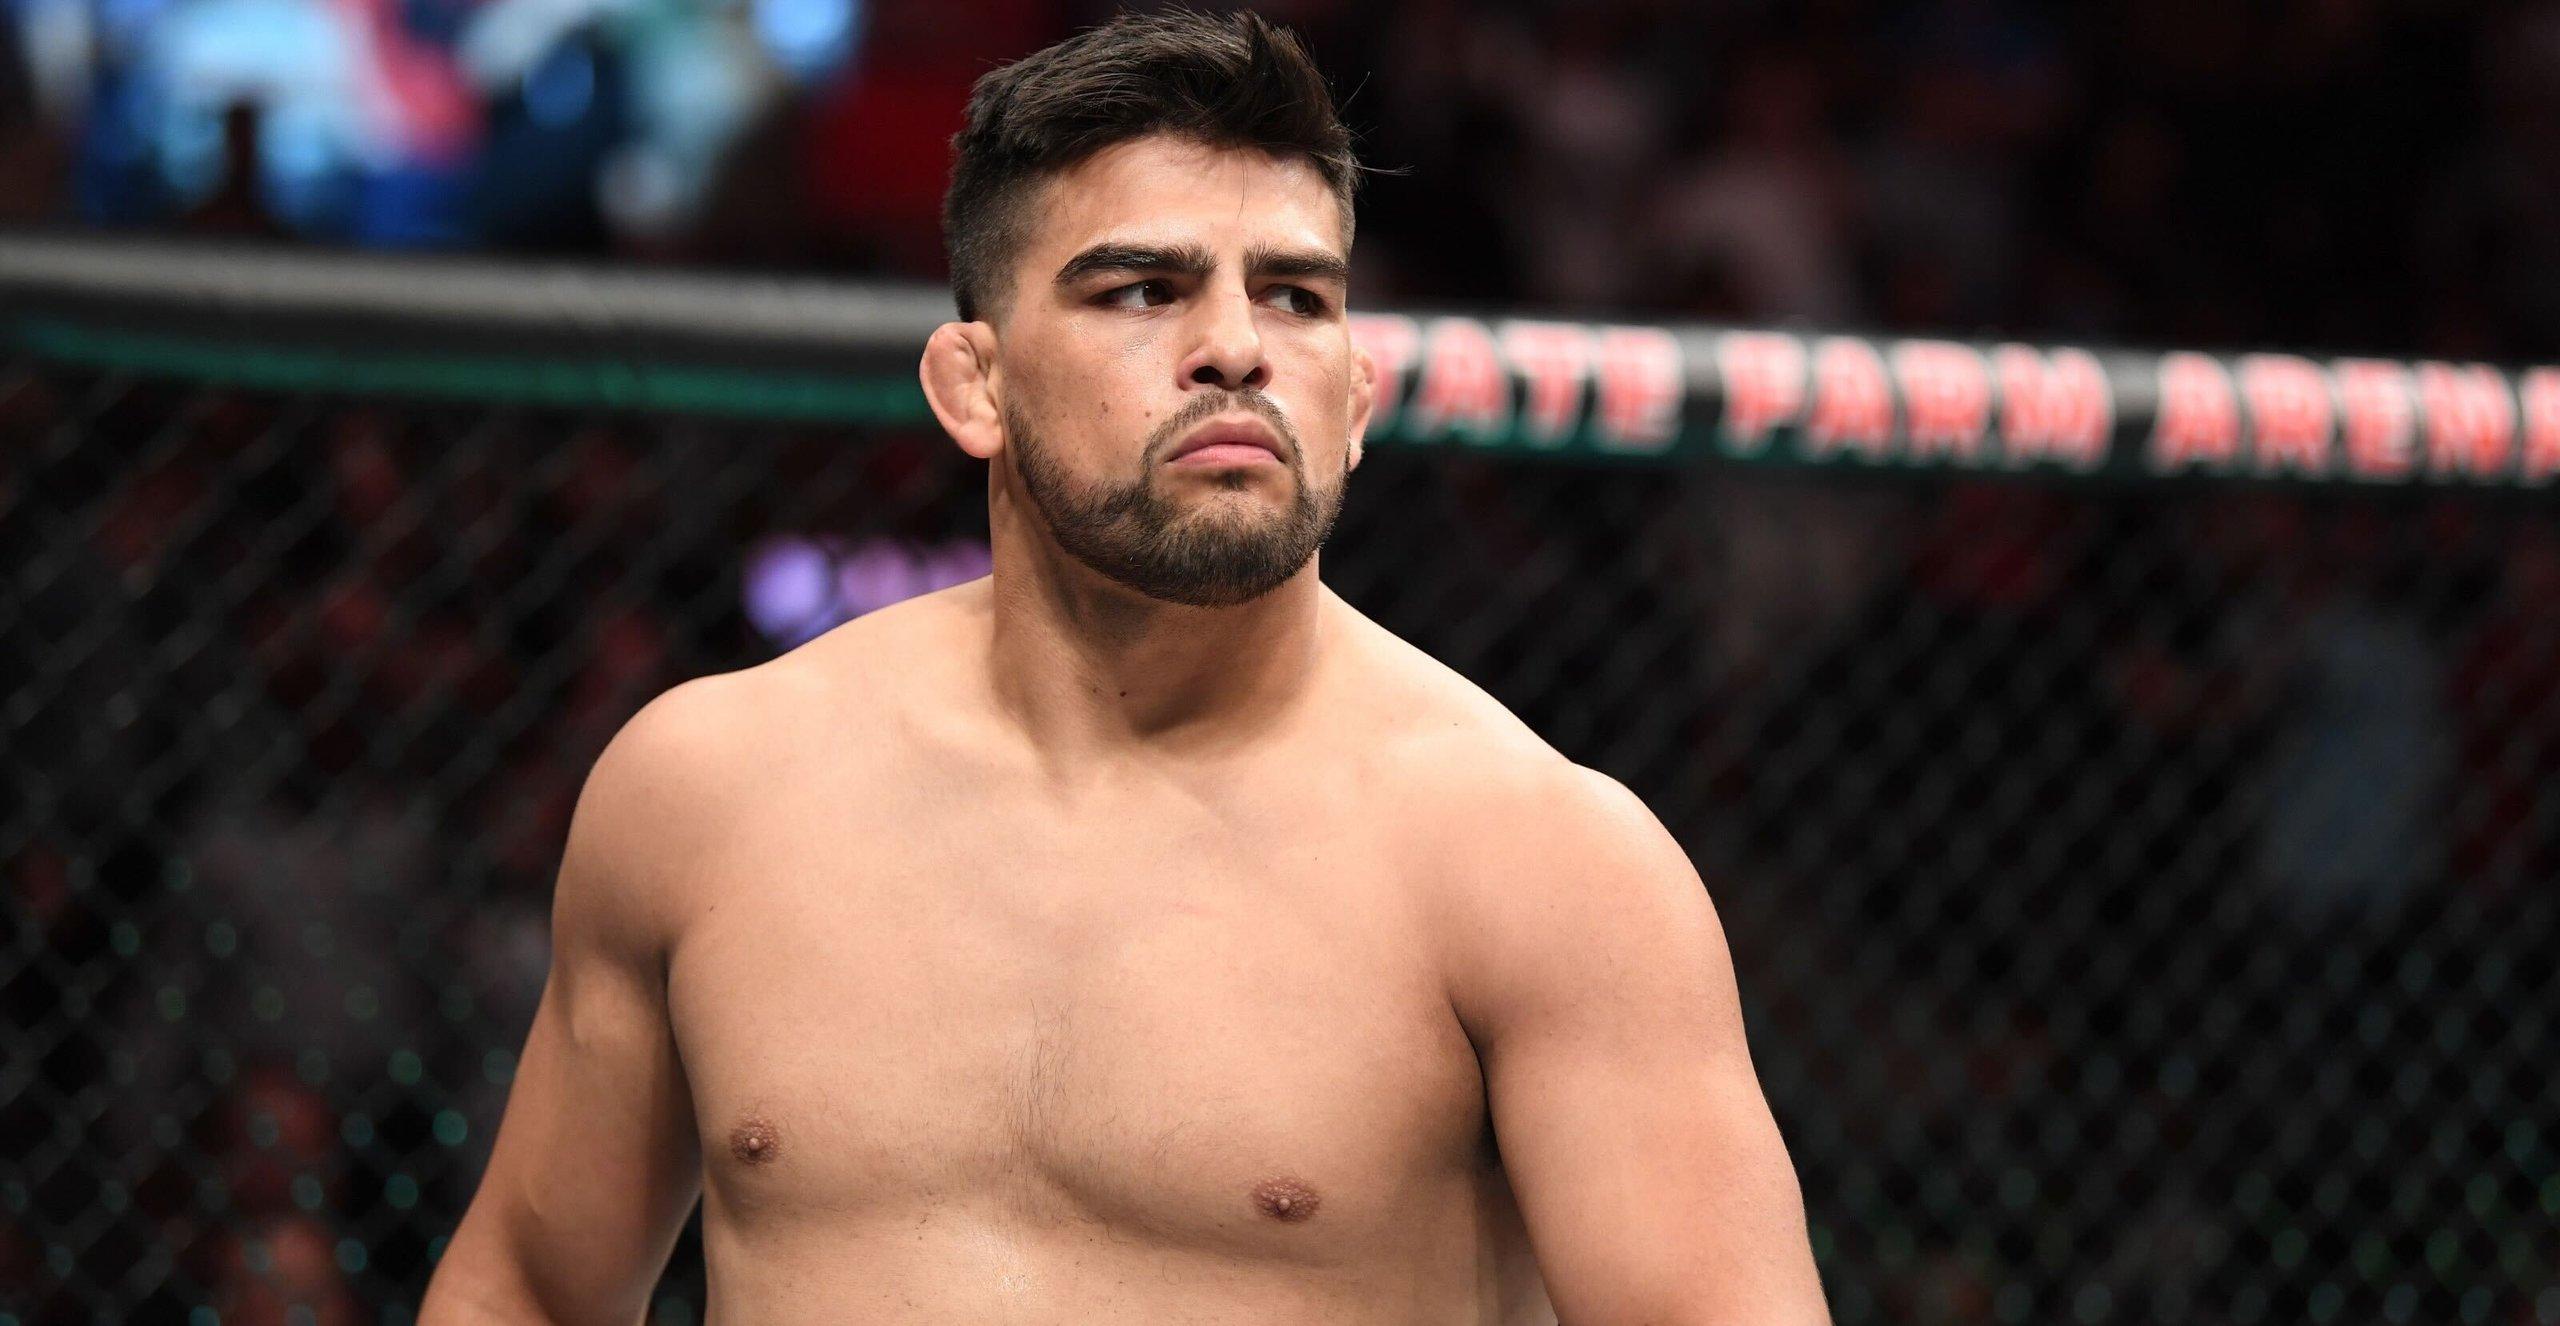  VIDEO: Kelvin Gastelum Announces His Move to Welterweight